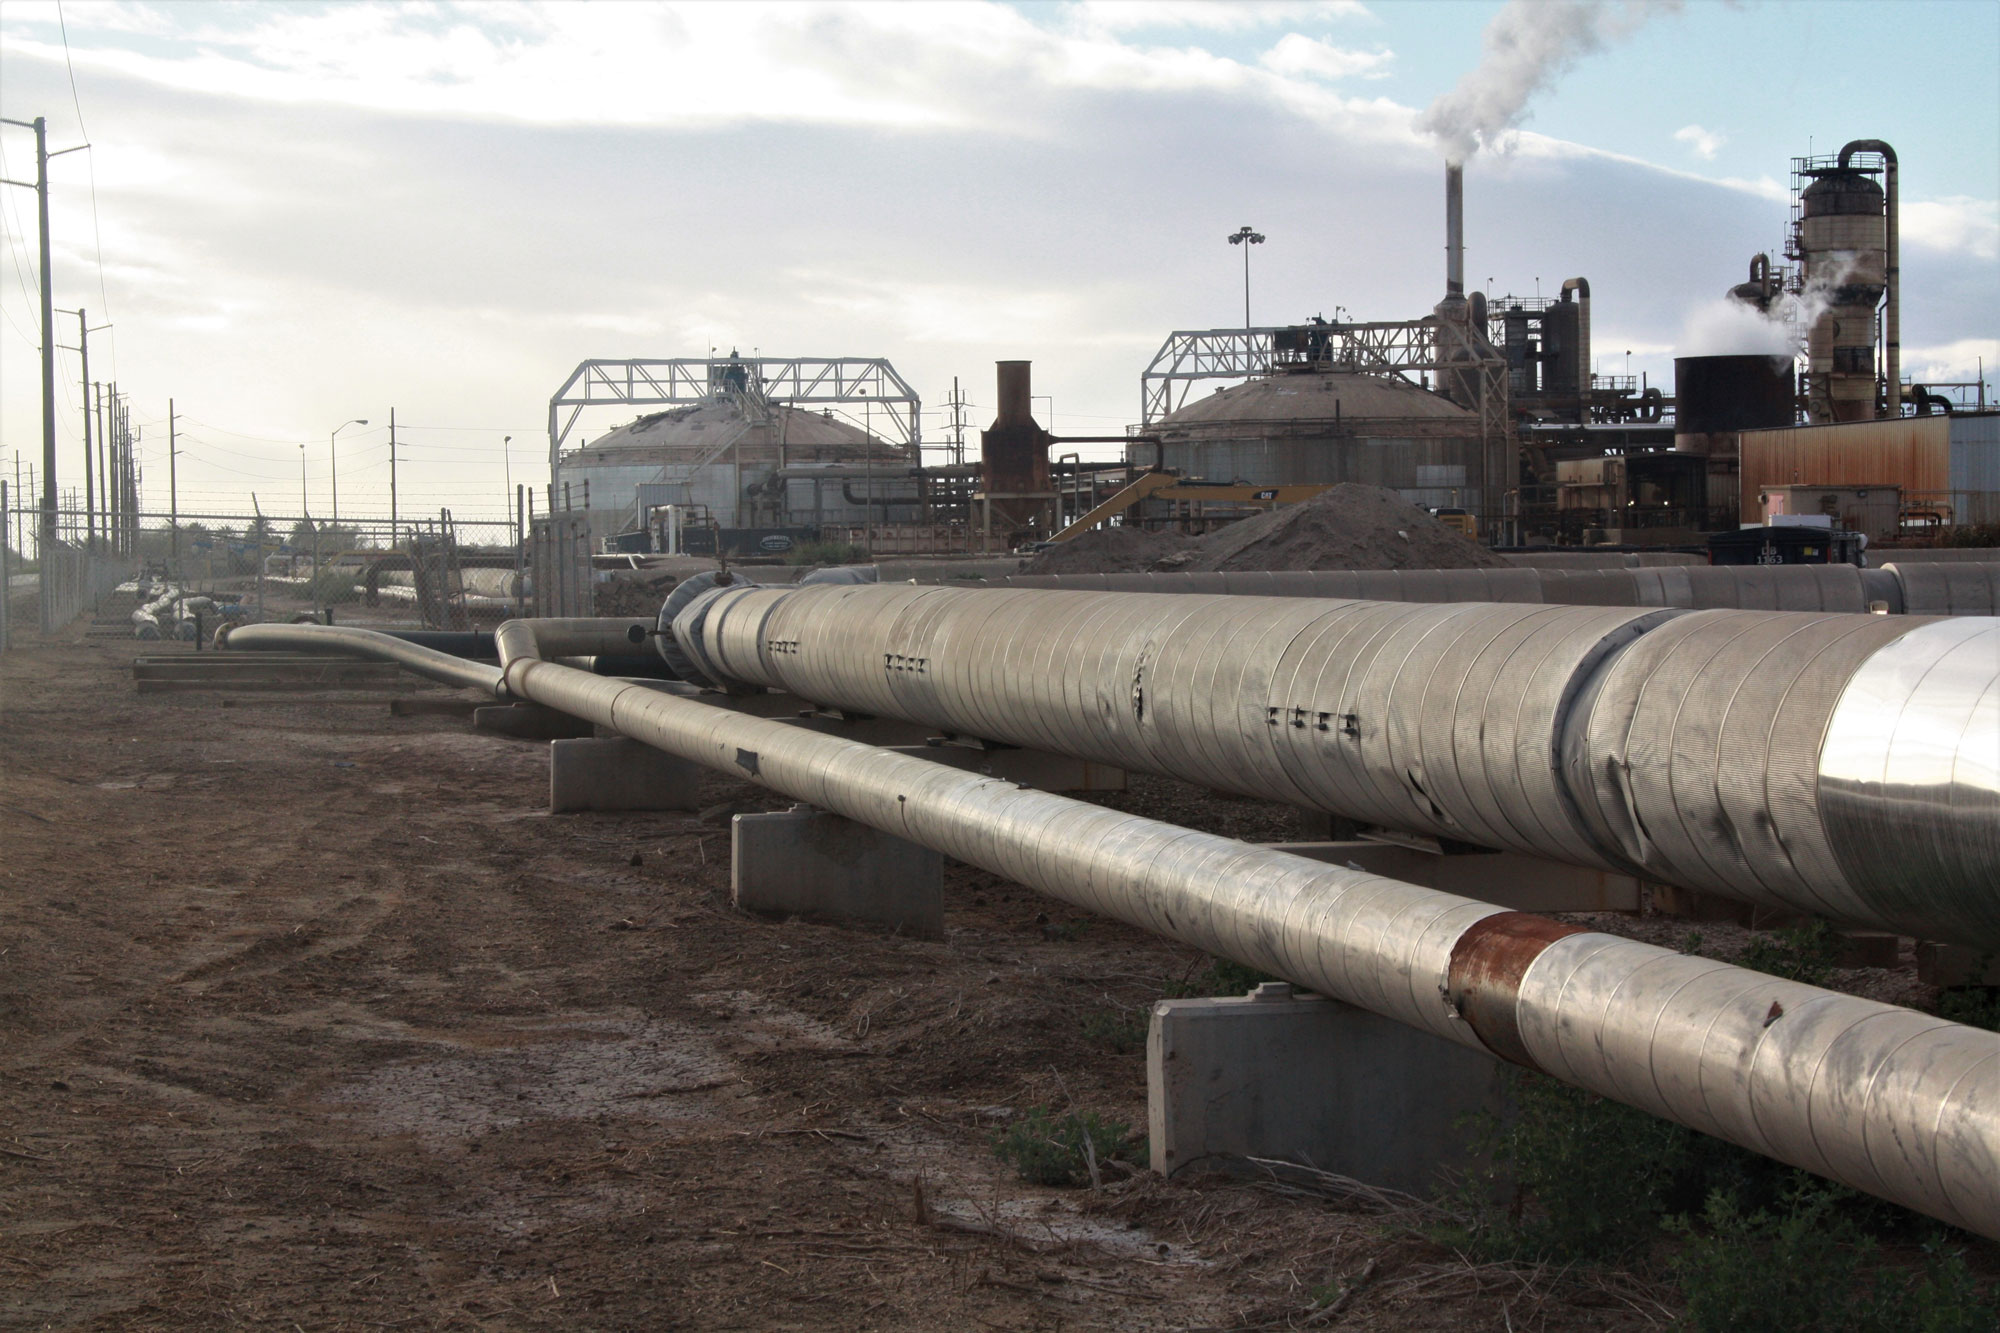 Photograph of part of a geothermal near the Salton Sea in southern California. The photo shows pipes in the foreground and cylindrical structures in the background, with steam rising from a smokestack.